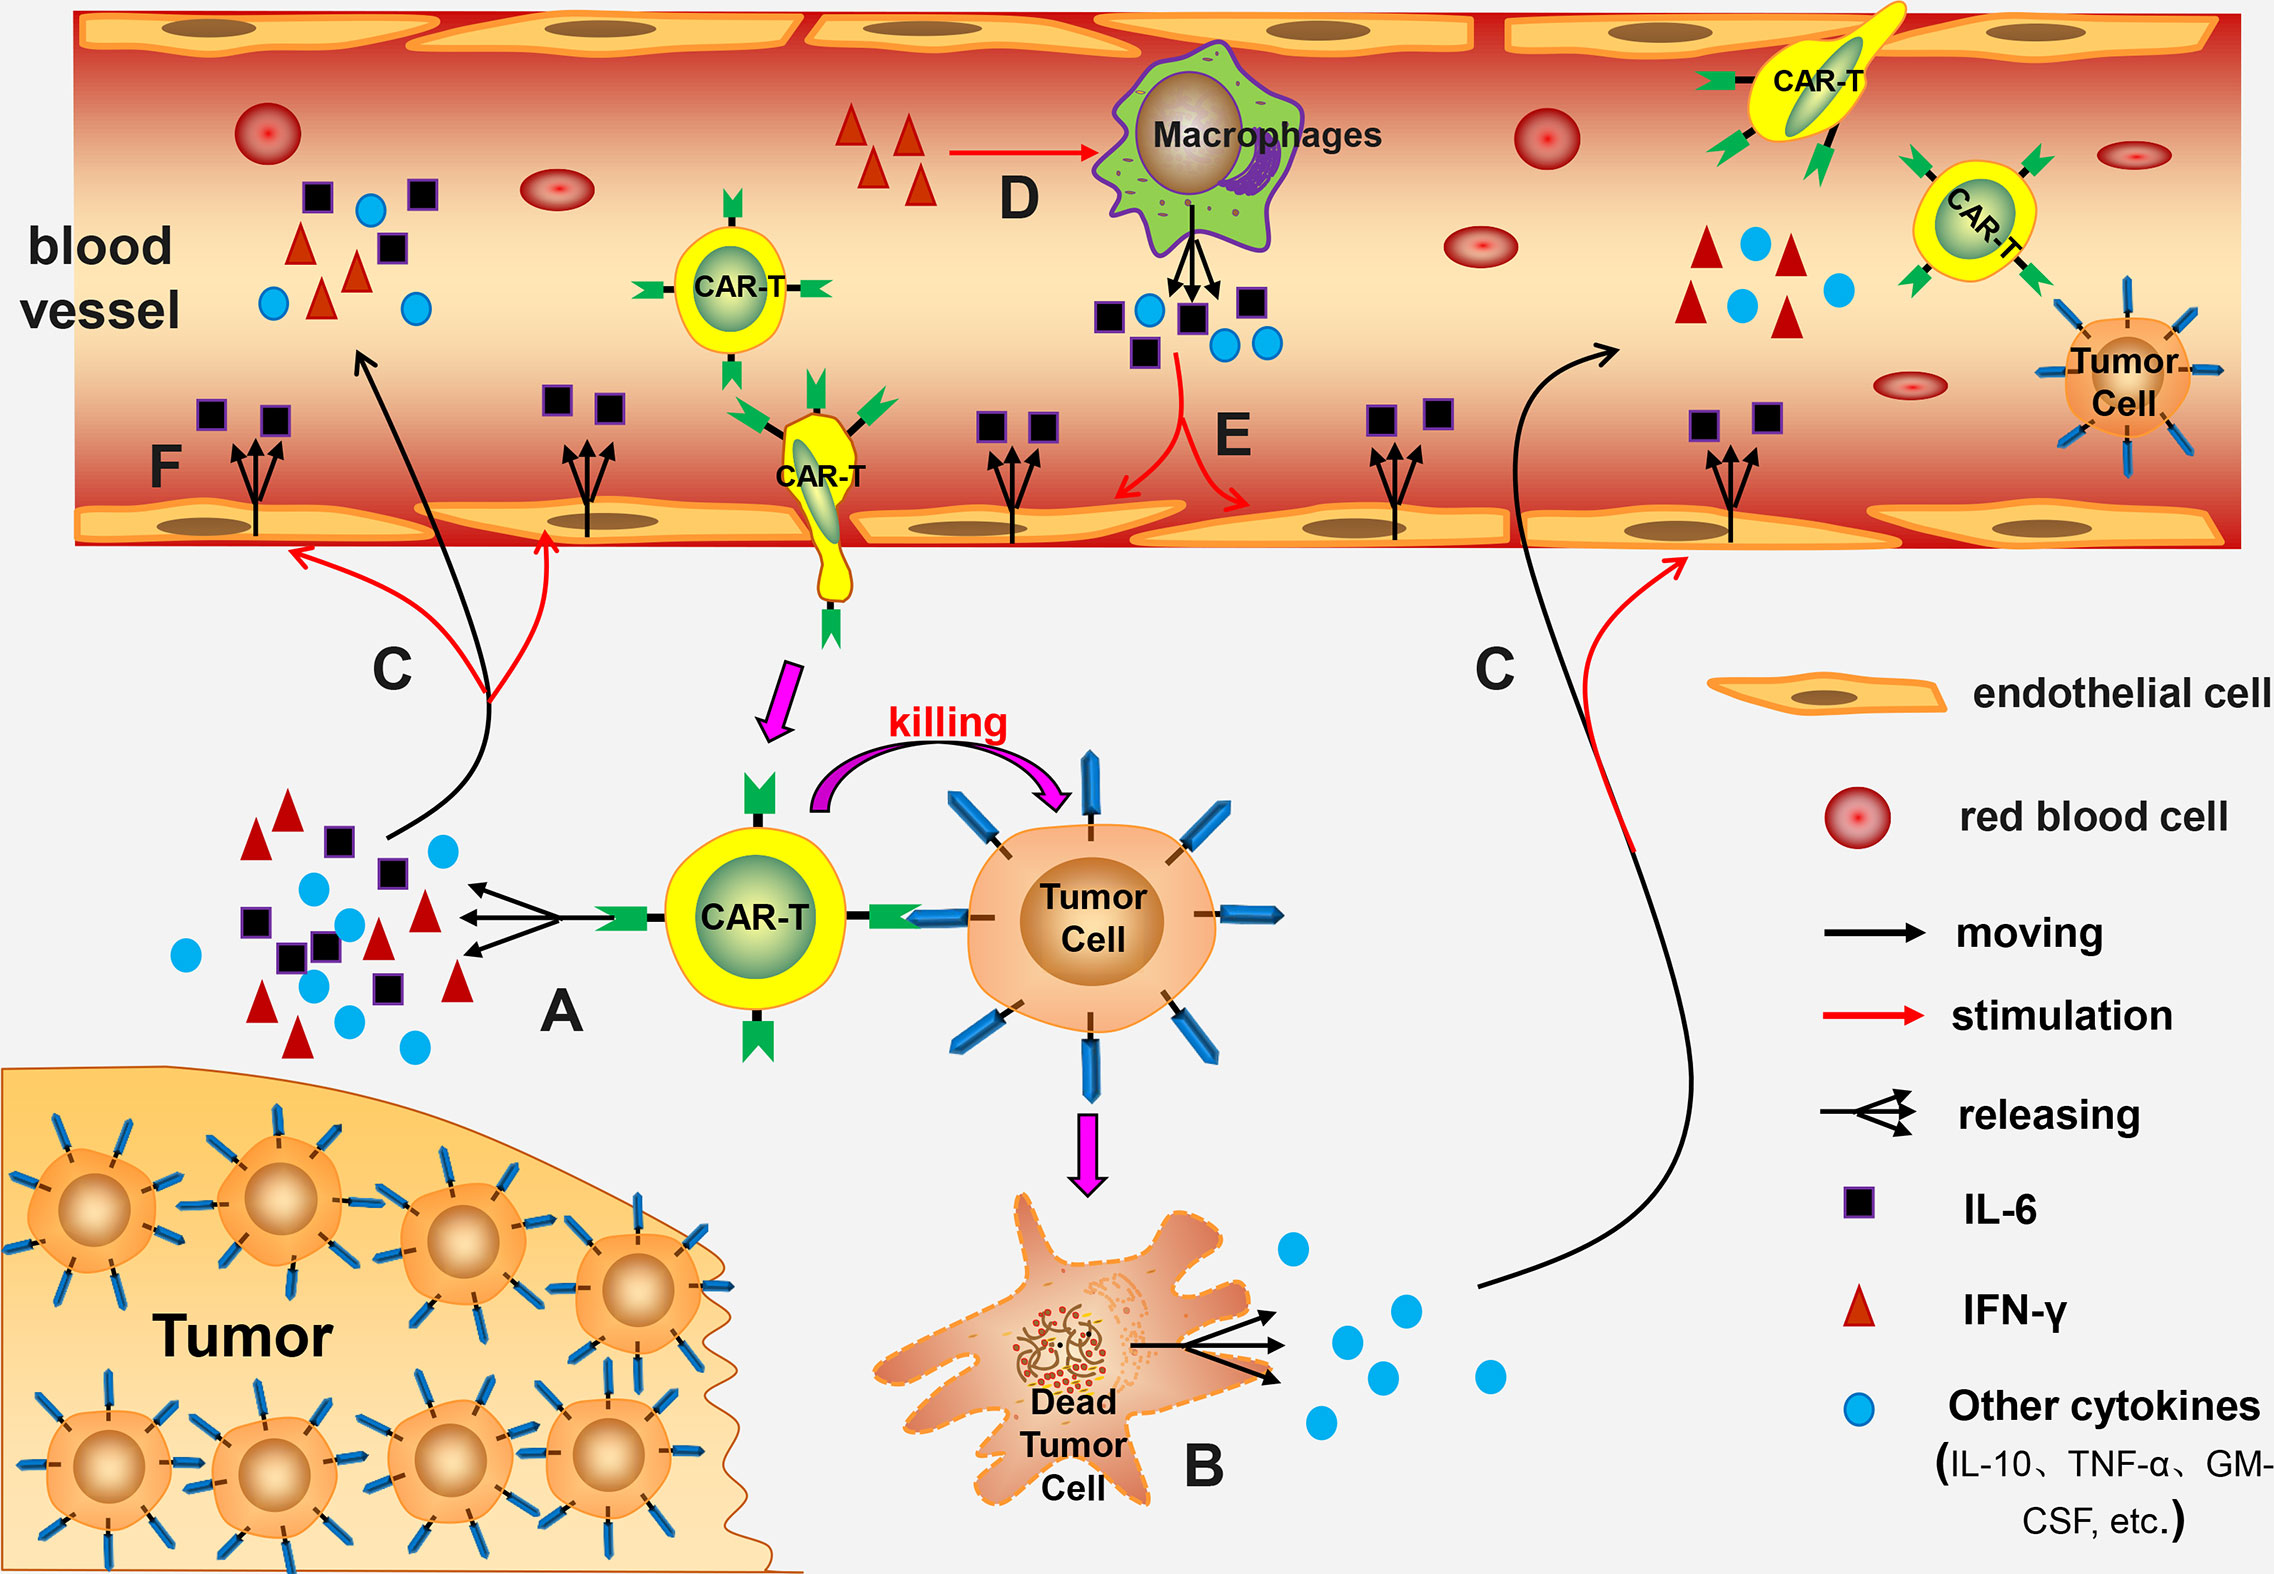 Frontiers | Reactions Related to CAR-T Cell Therapy | Immunology